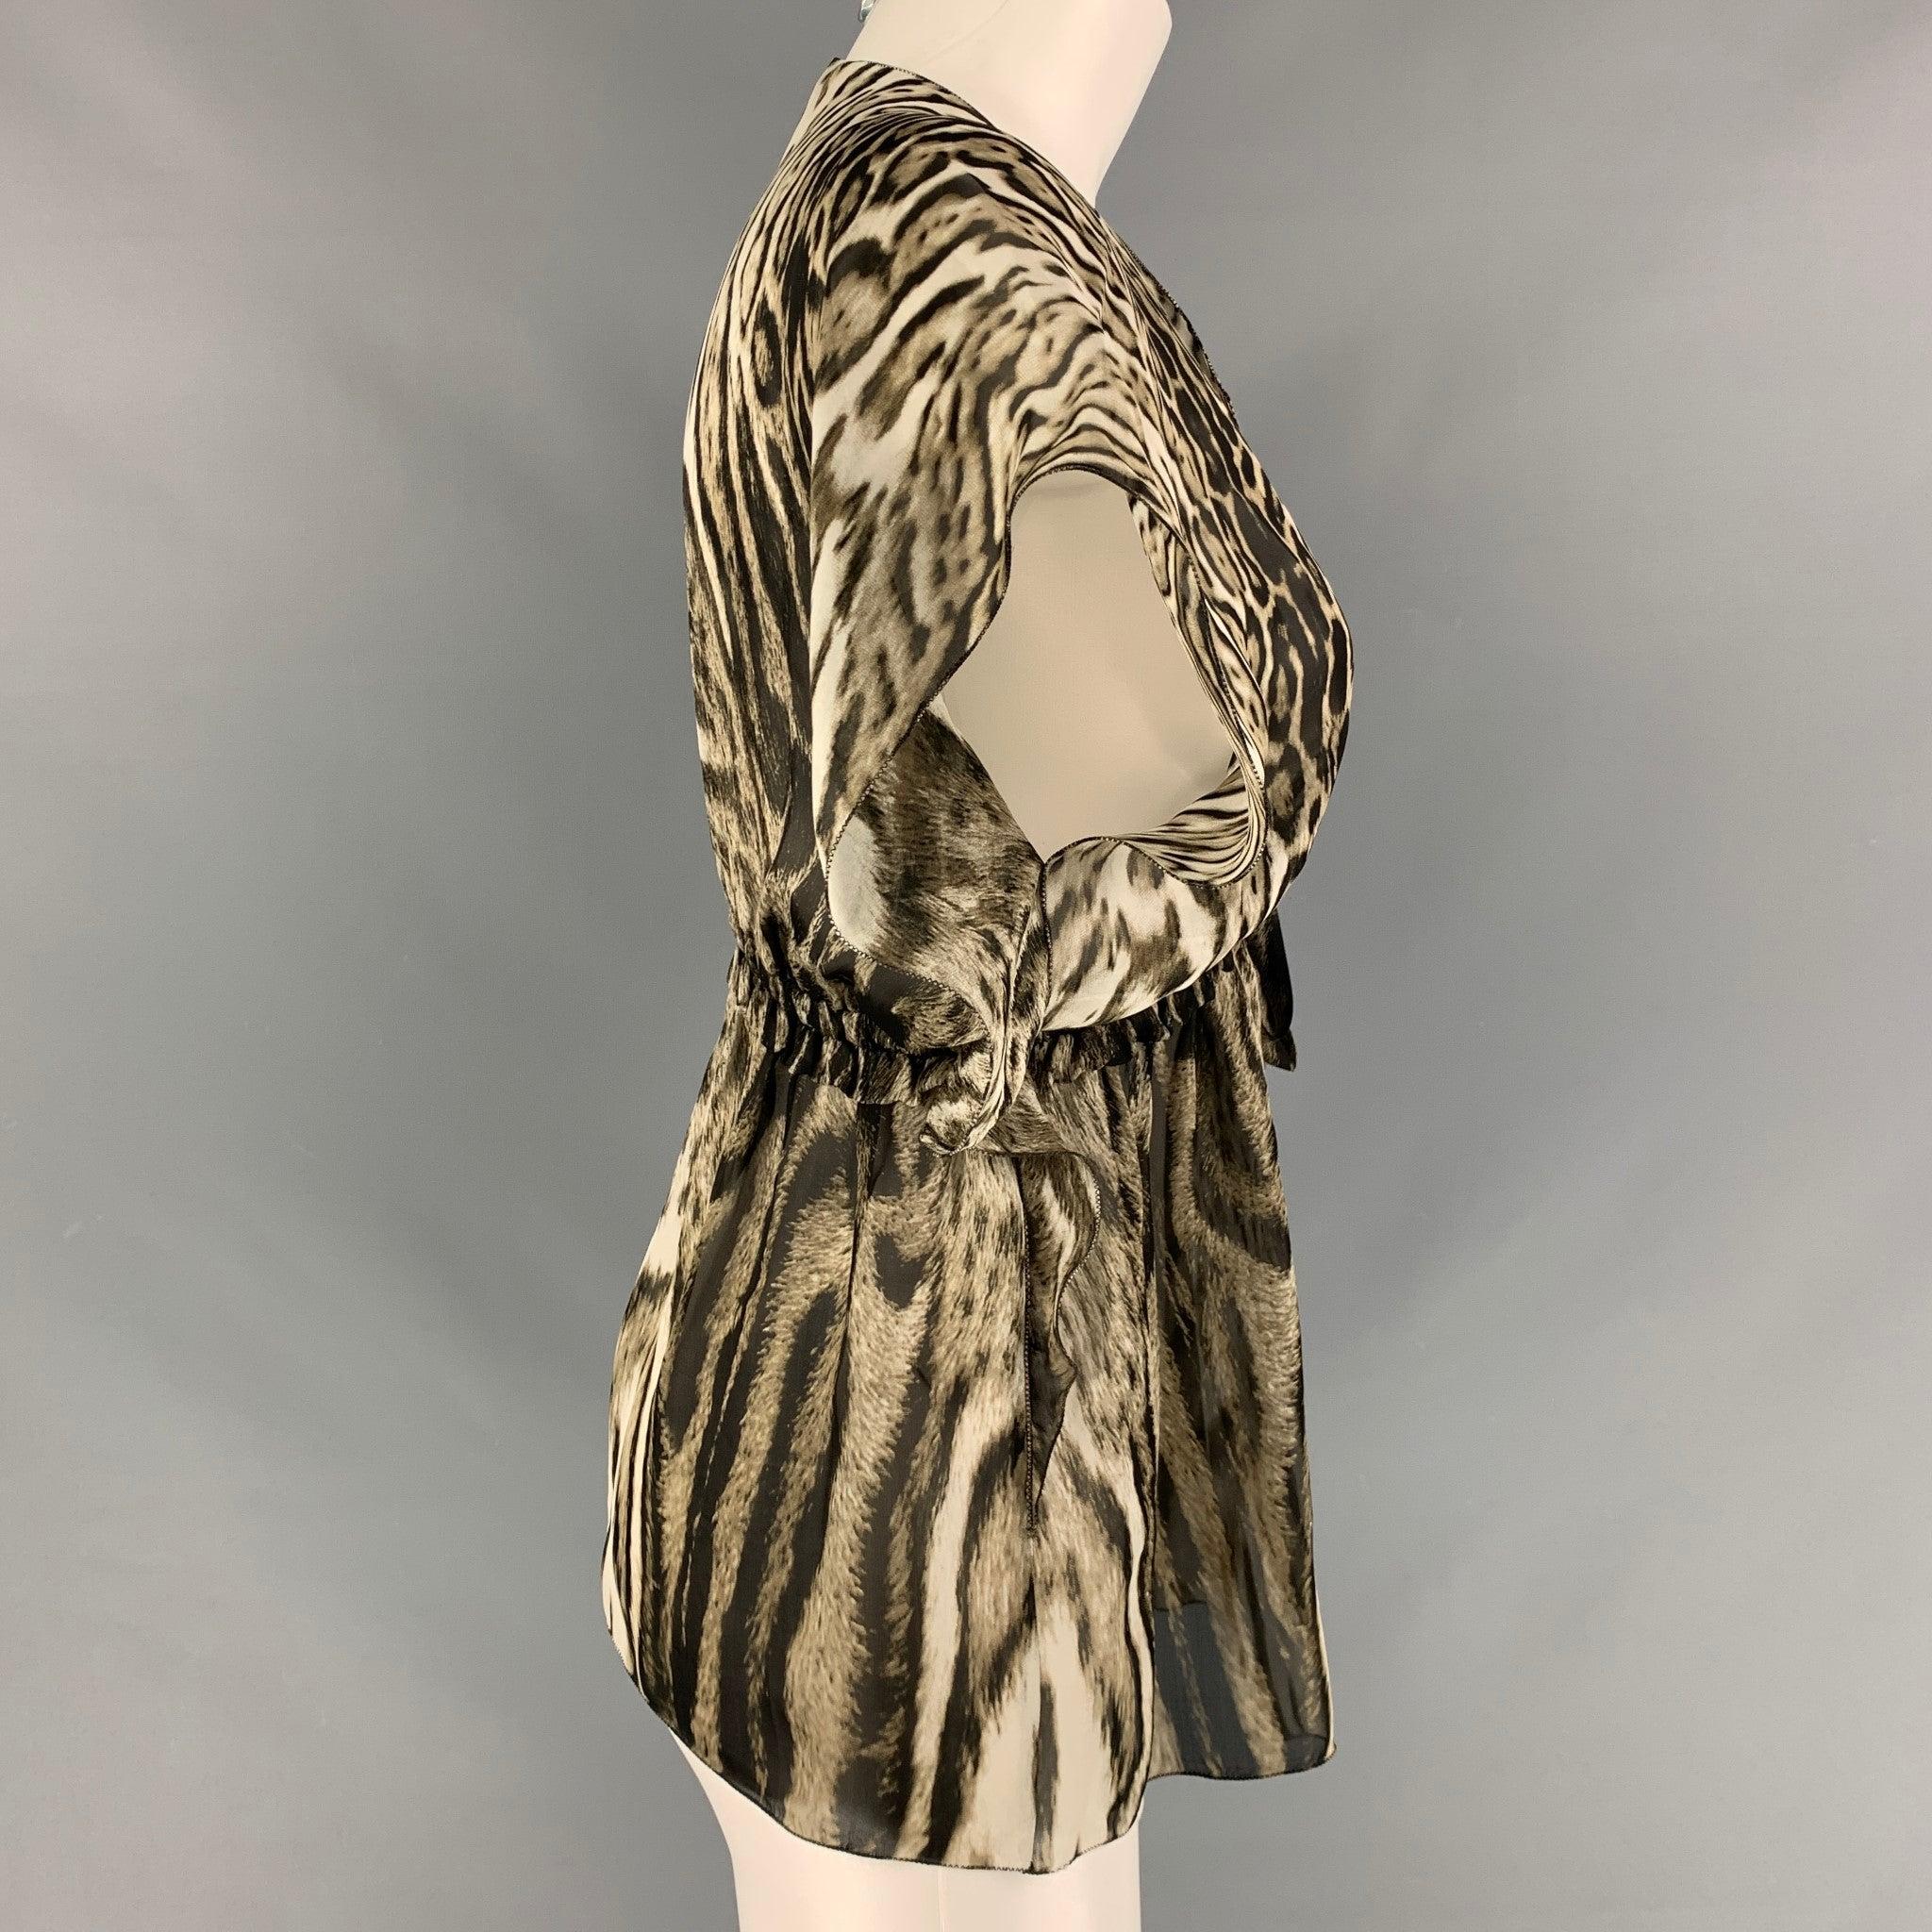 ROBERTO CAVALLI sleeveless blouse comes in olive and black animal print silk fabric featuring 
 a v- neck and draw string detail at bust. Made in Italy.New With Tags. 
 

 Marked:  38 
 

 Measurements: 
  
 Shoulder: 15 inches Bust: 36 inches